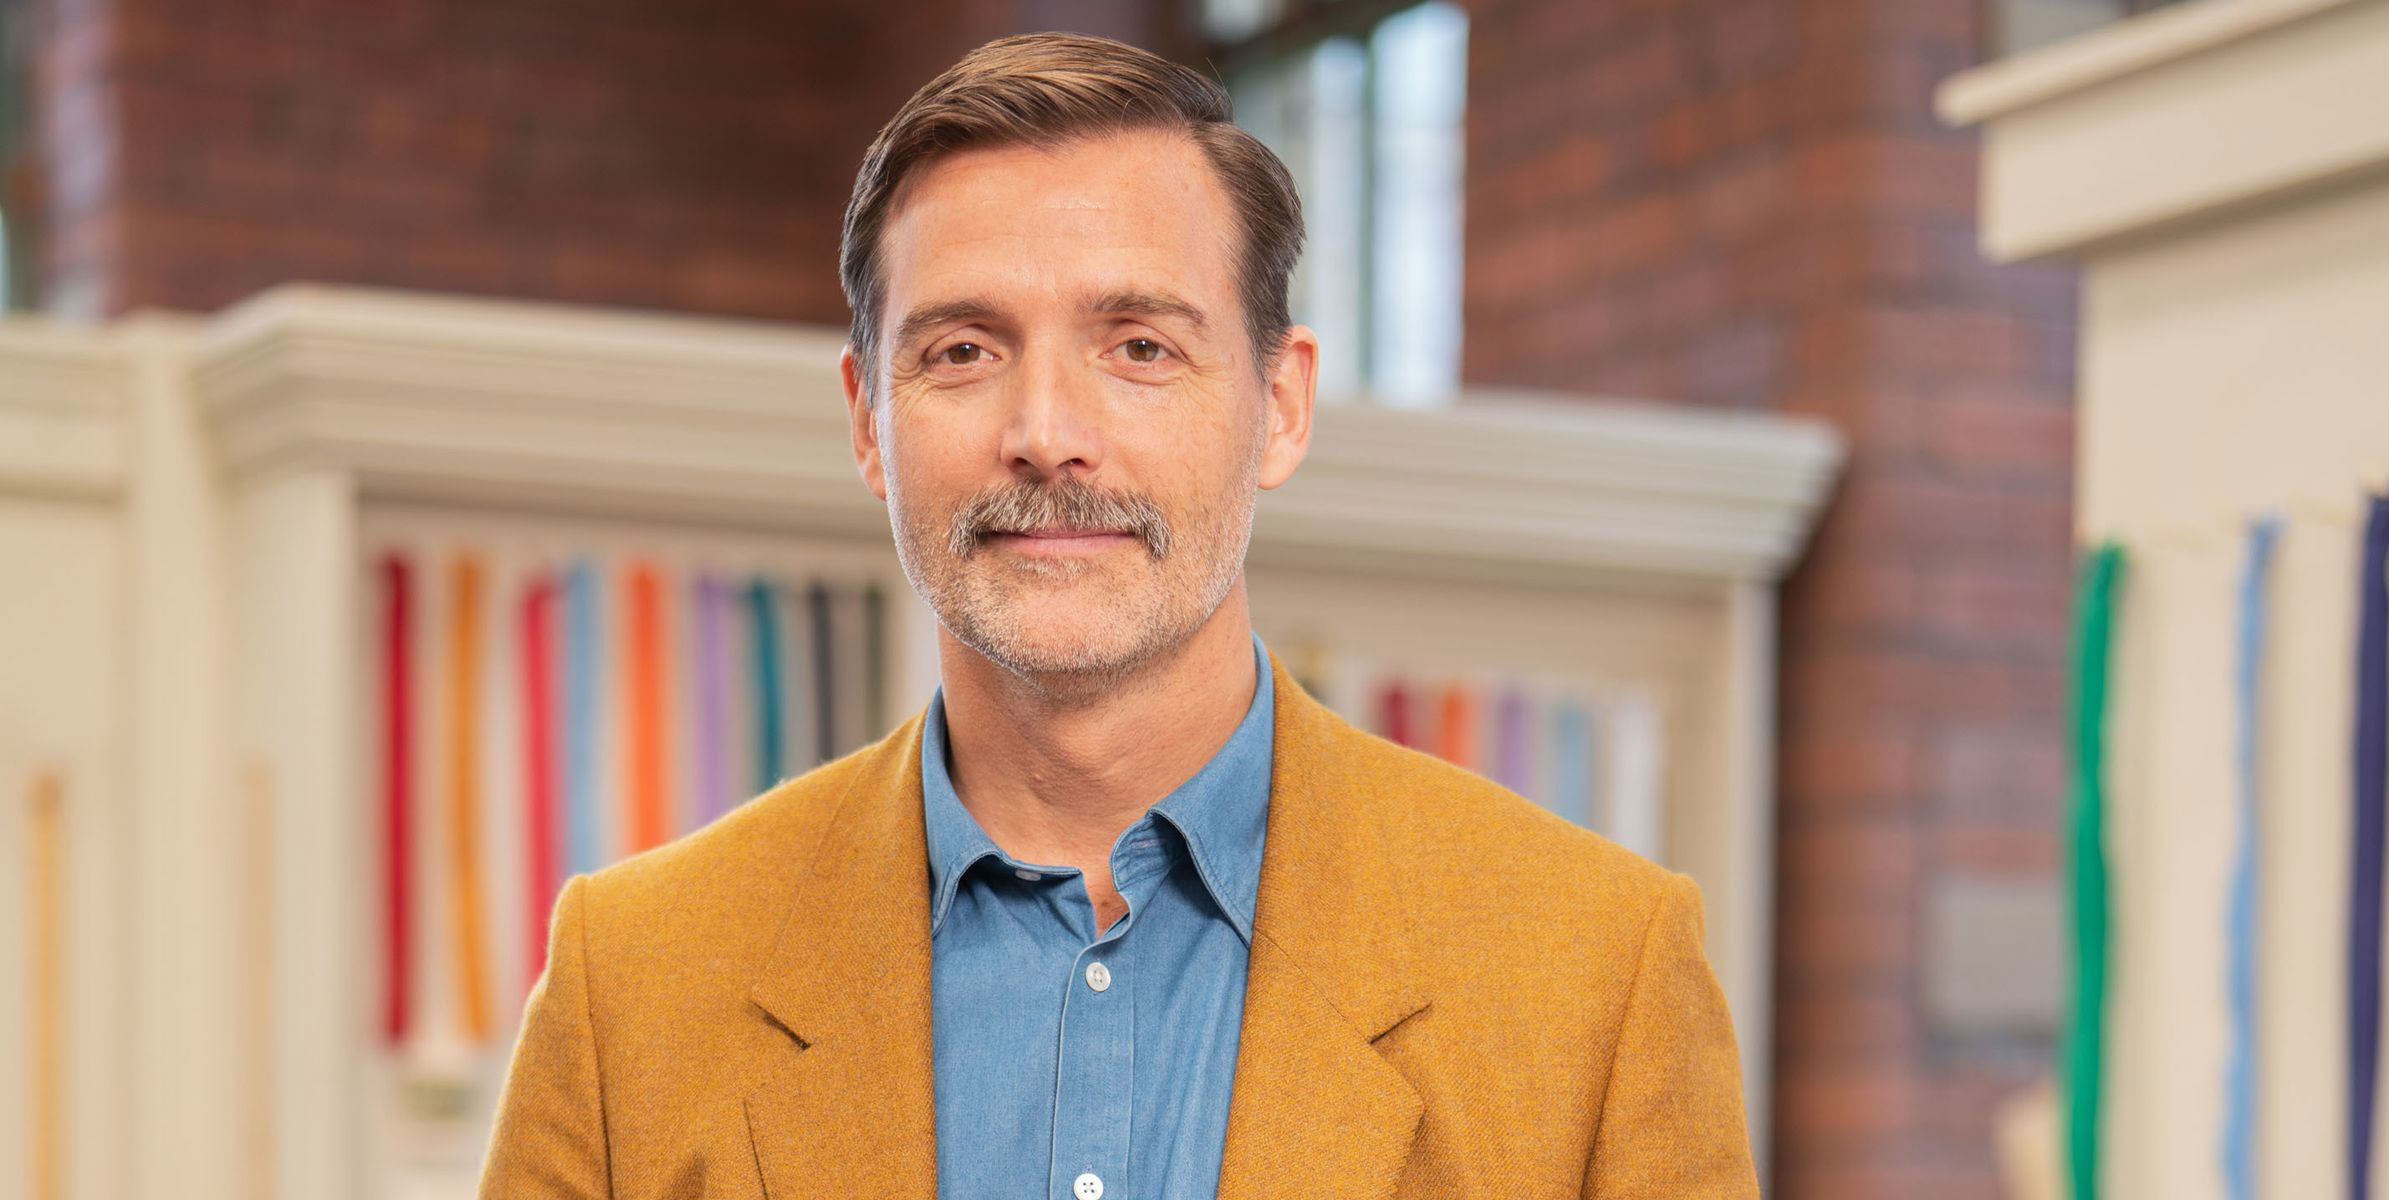 Sewing Bee's Patrick Grant shares his top tips for dressing with style